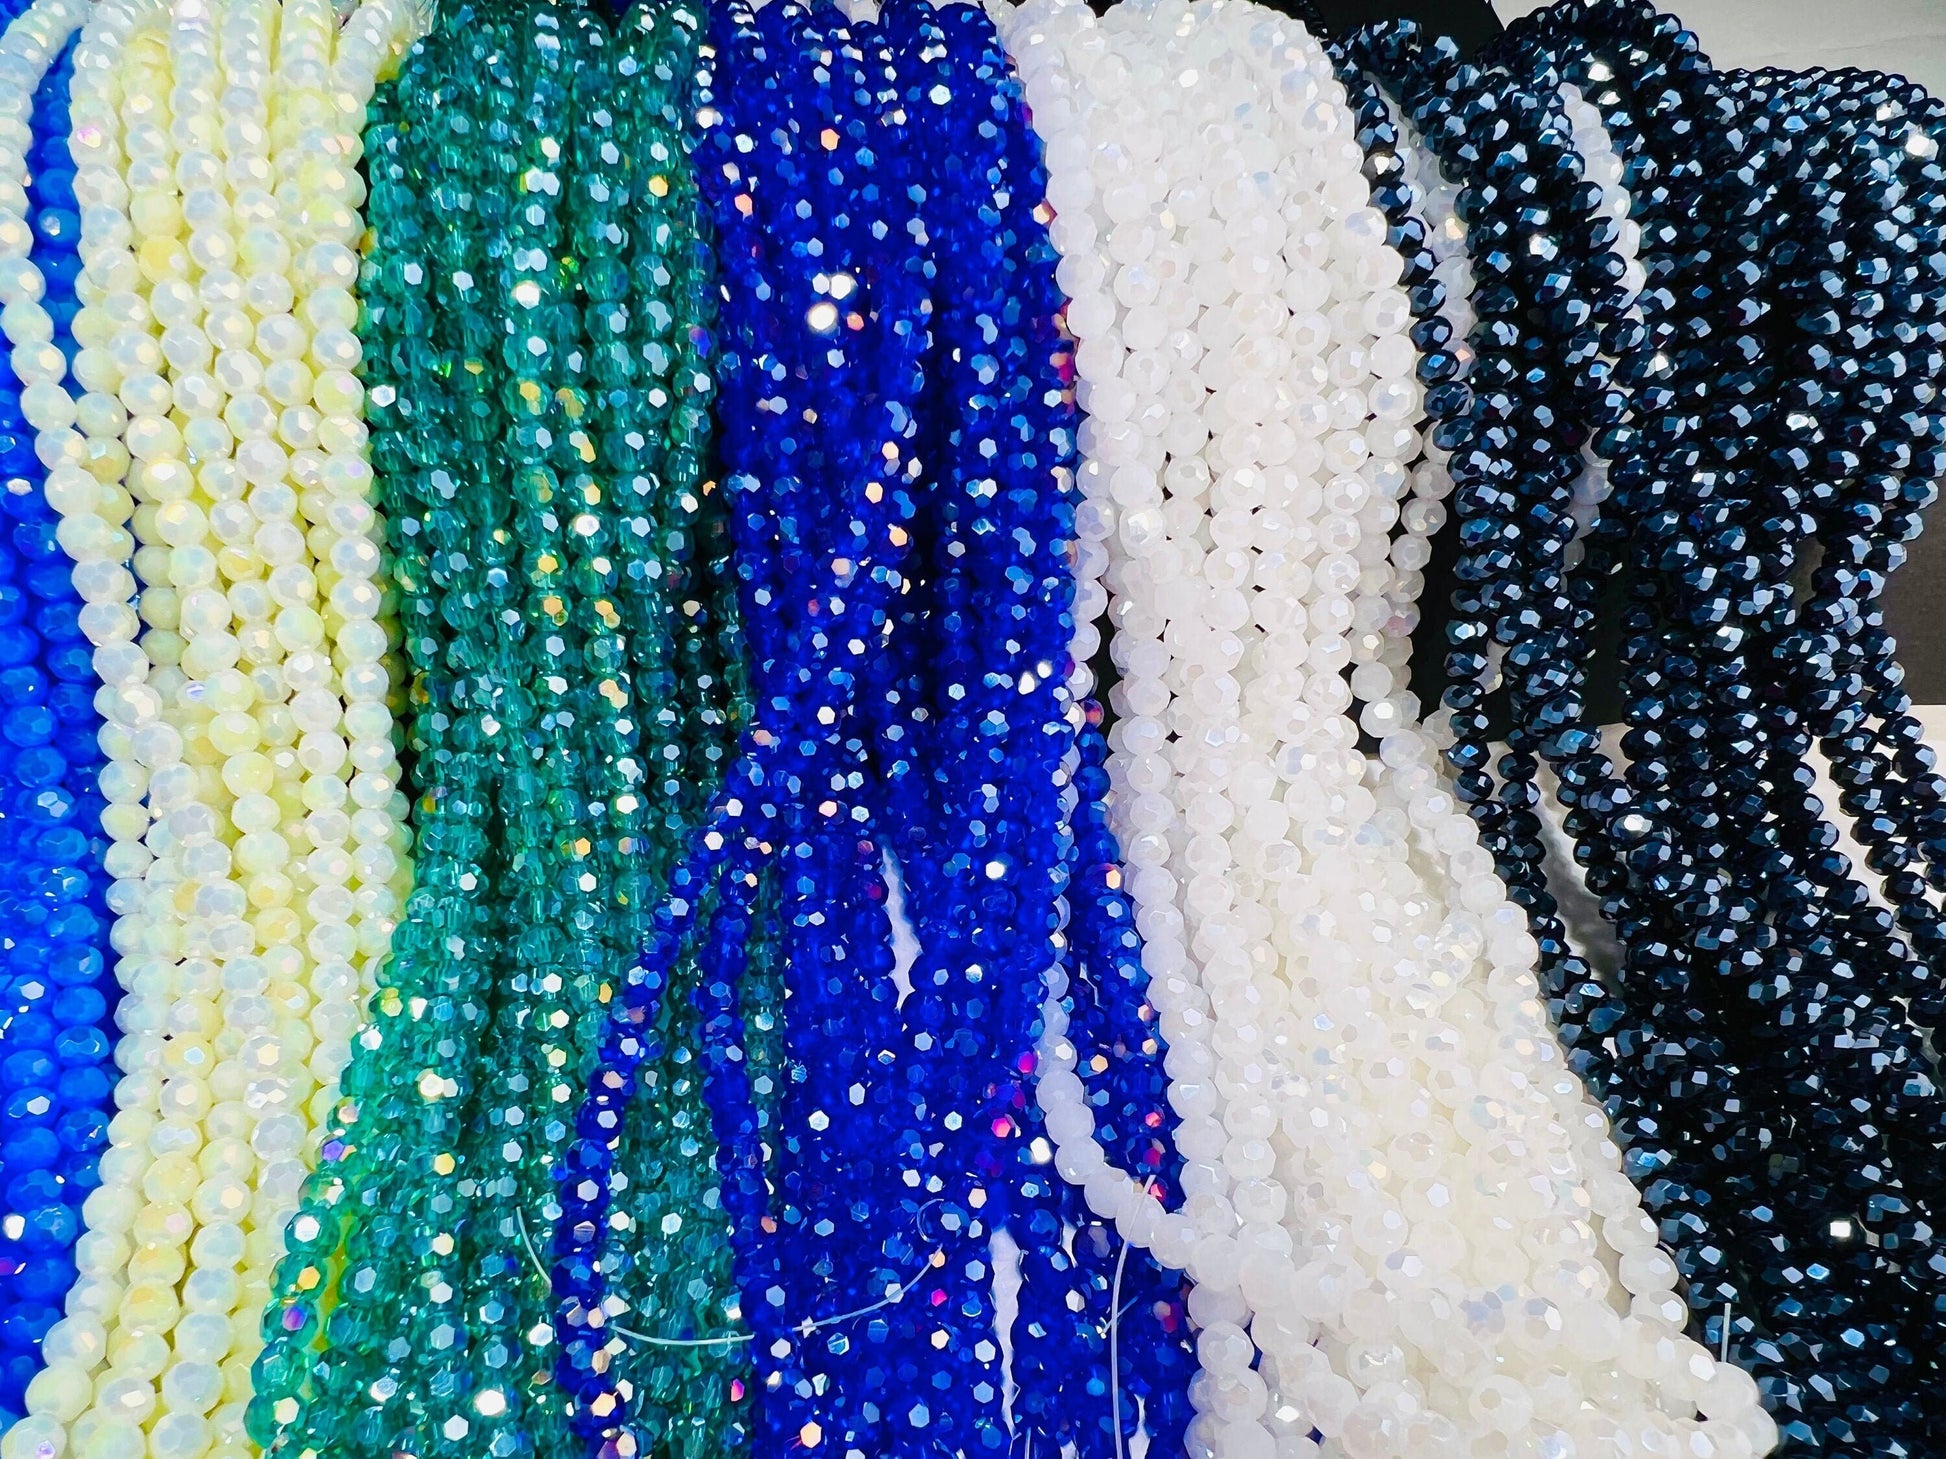 9 strand 4mm Round crystal mix 14”each strand (900pcs total approx ),Very Sparkly Crystal , Bead for Spacer,Art Deco, jewelry making bead.